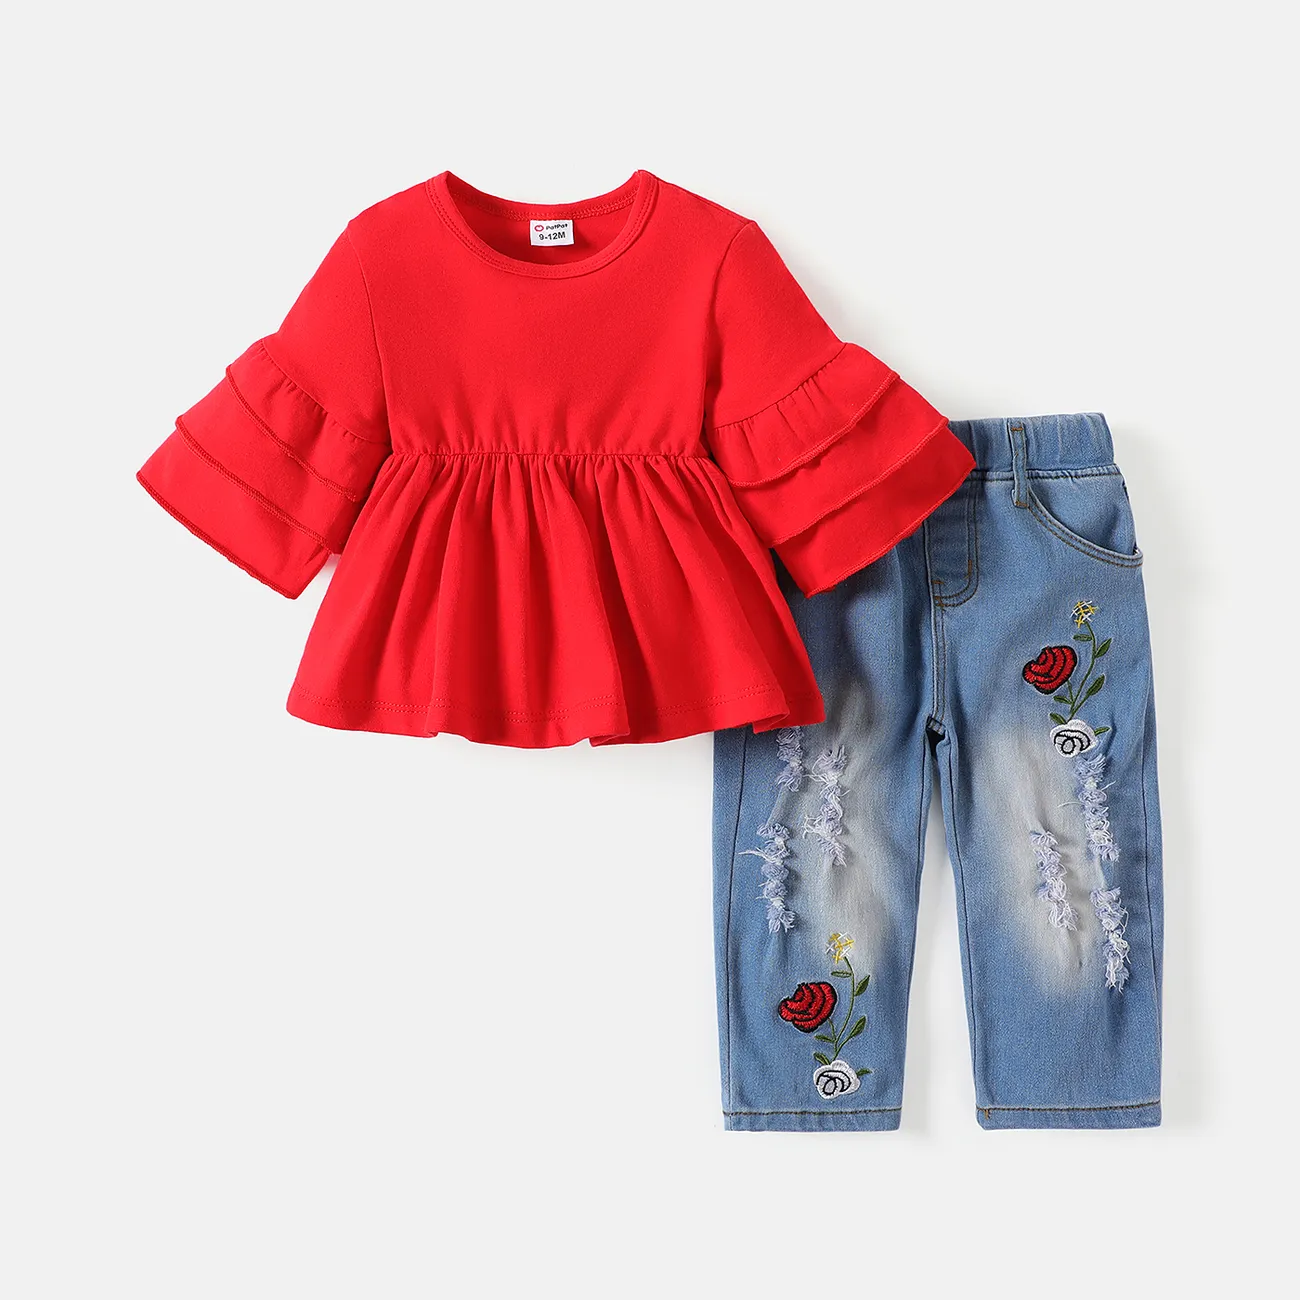 2pcs Baby Girl Cotton Layered Ruffle Trim Flare-sleeve Top and Rose Floral Embroidered Ripped Jeans Set  big image 1